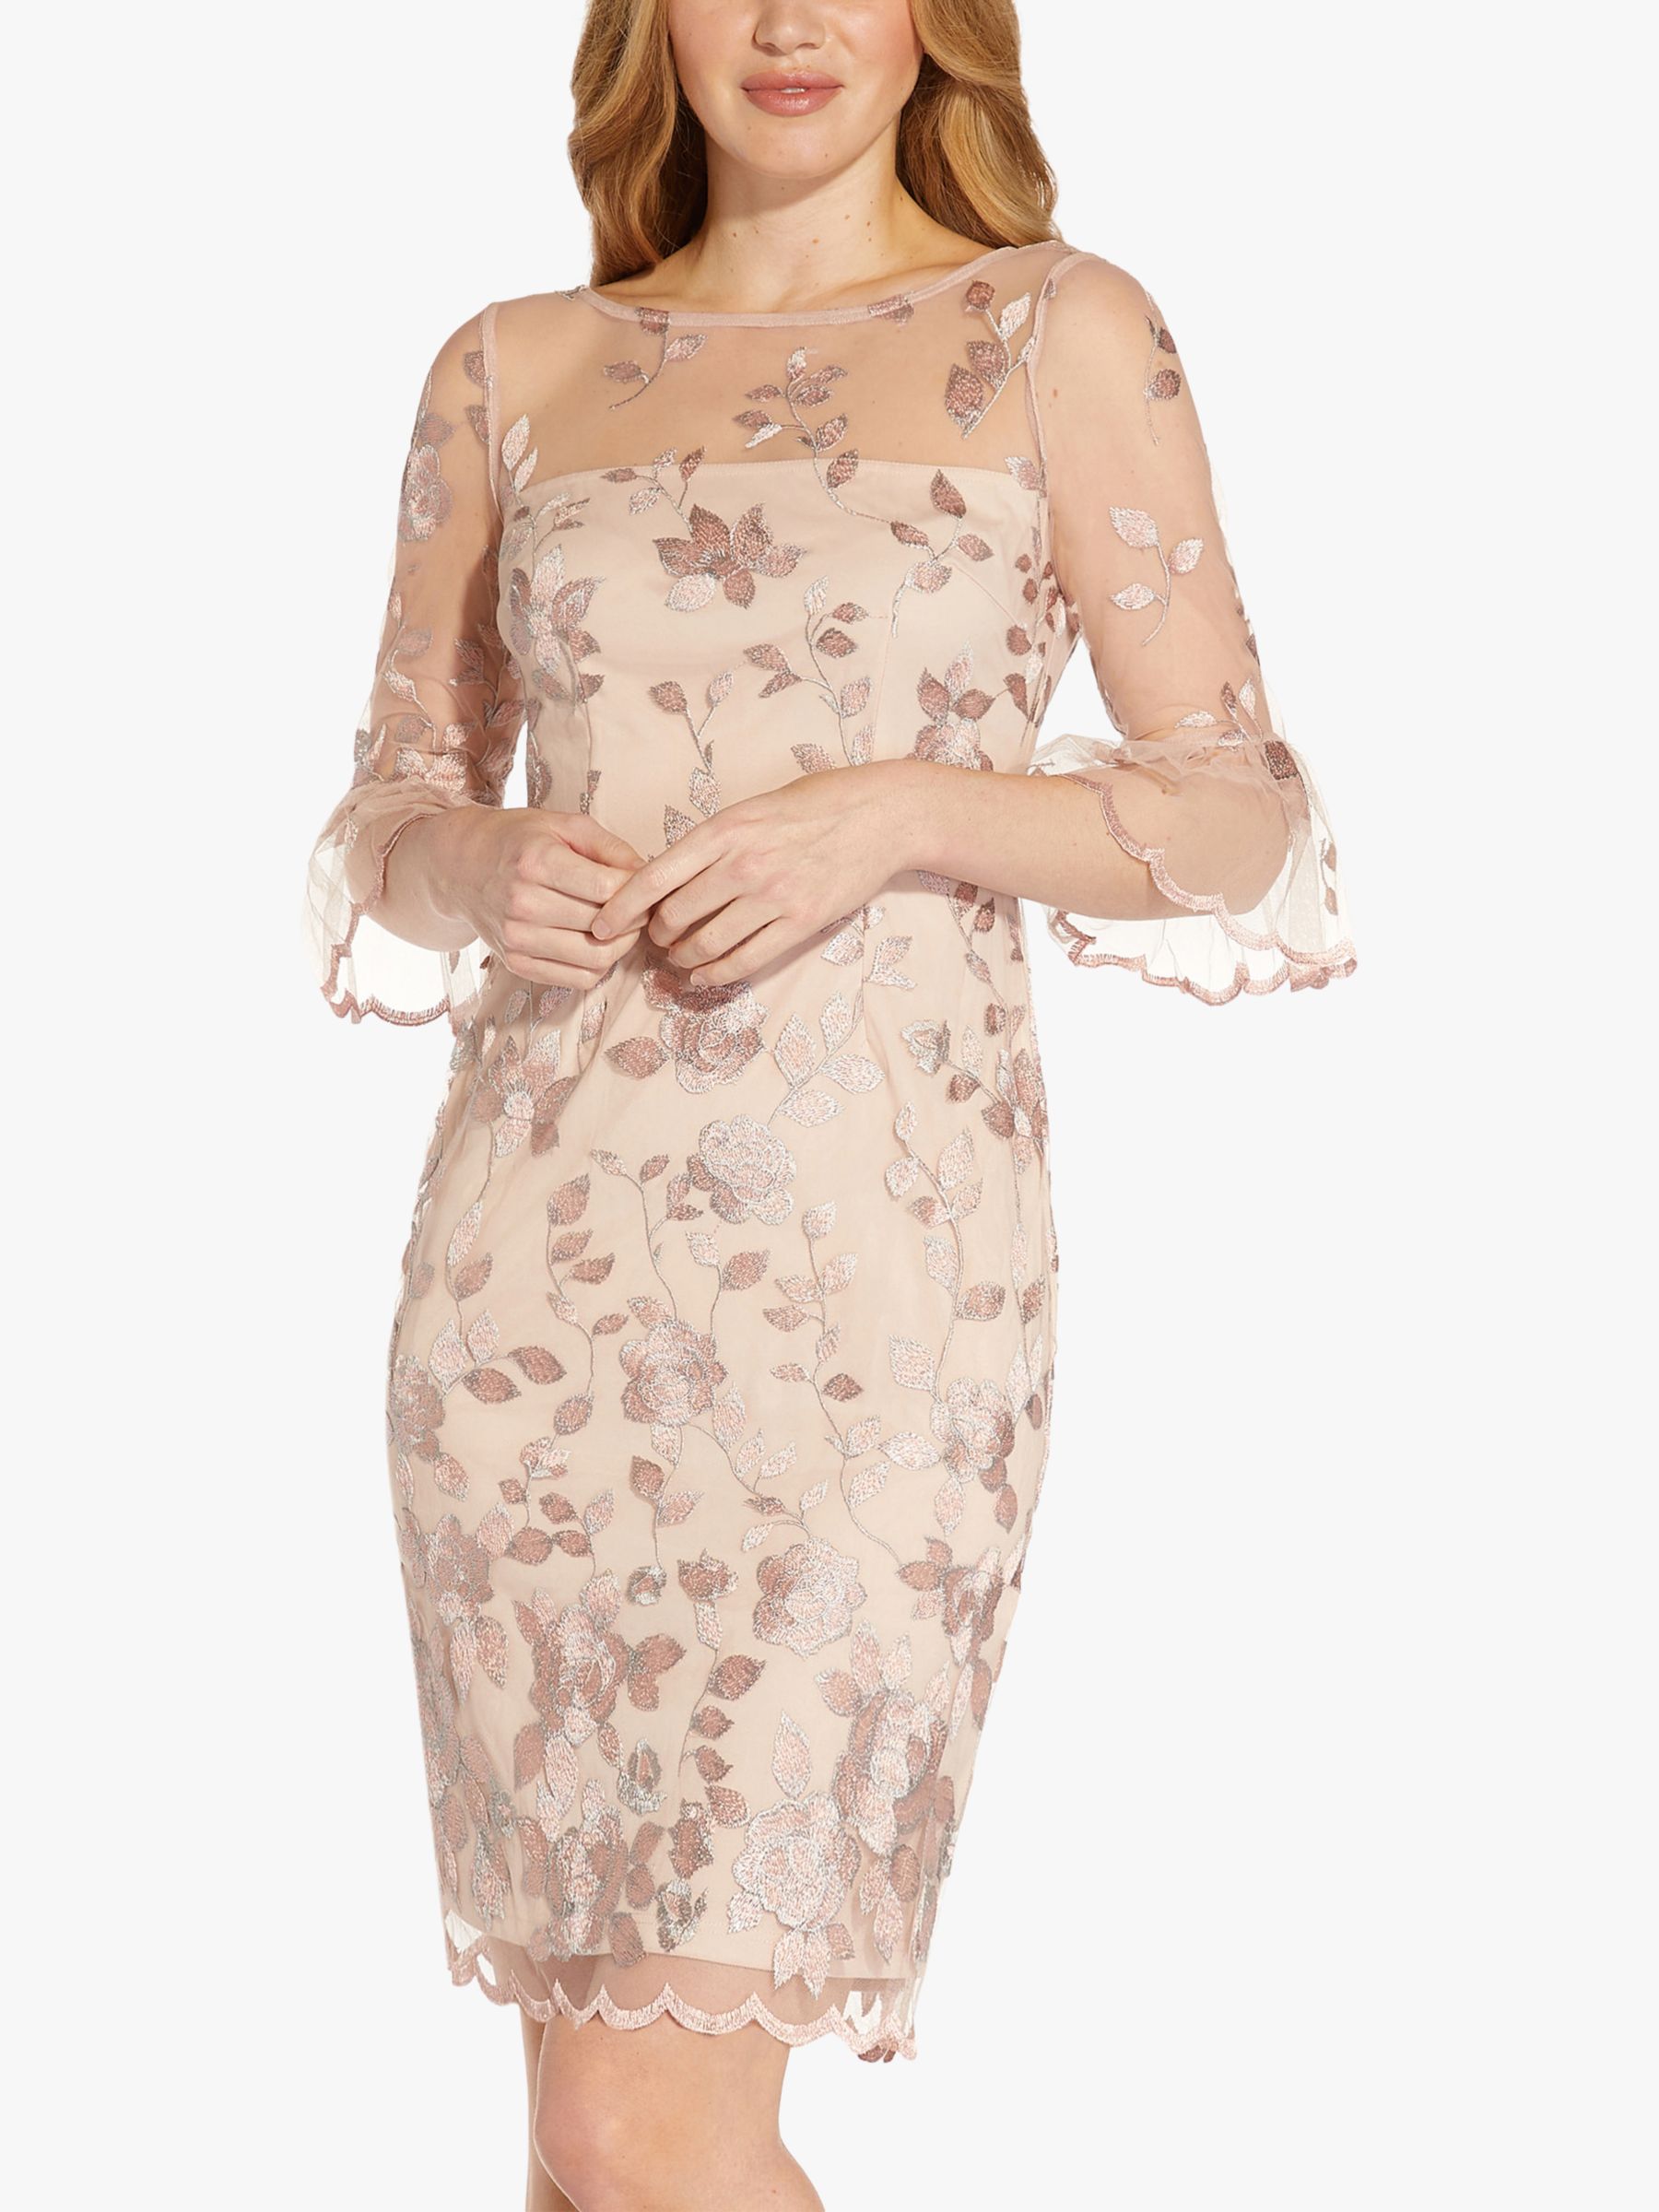 Adrianna Papell Embroidered Bell Sleeve Dress, Champagne